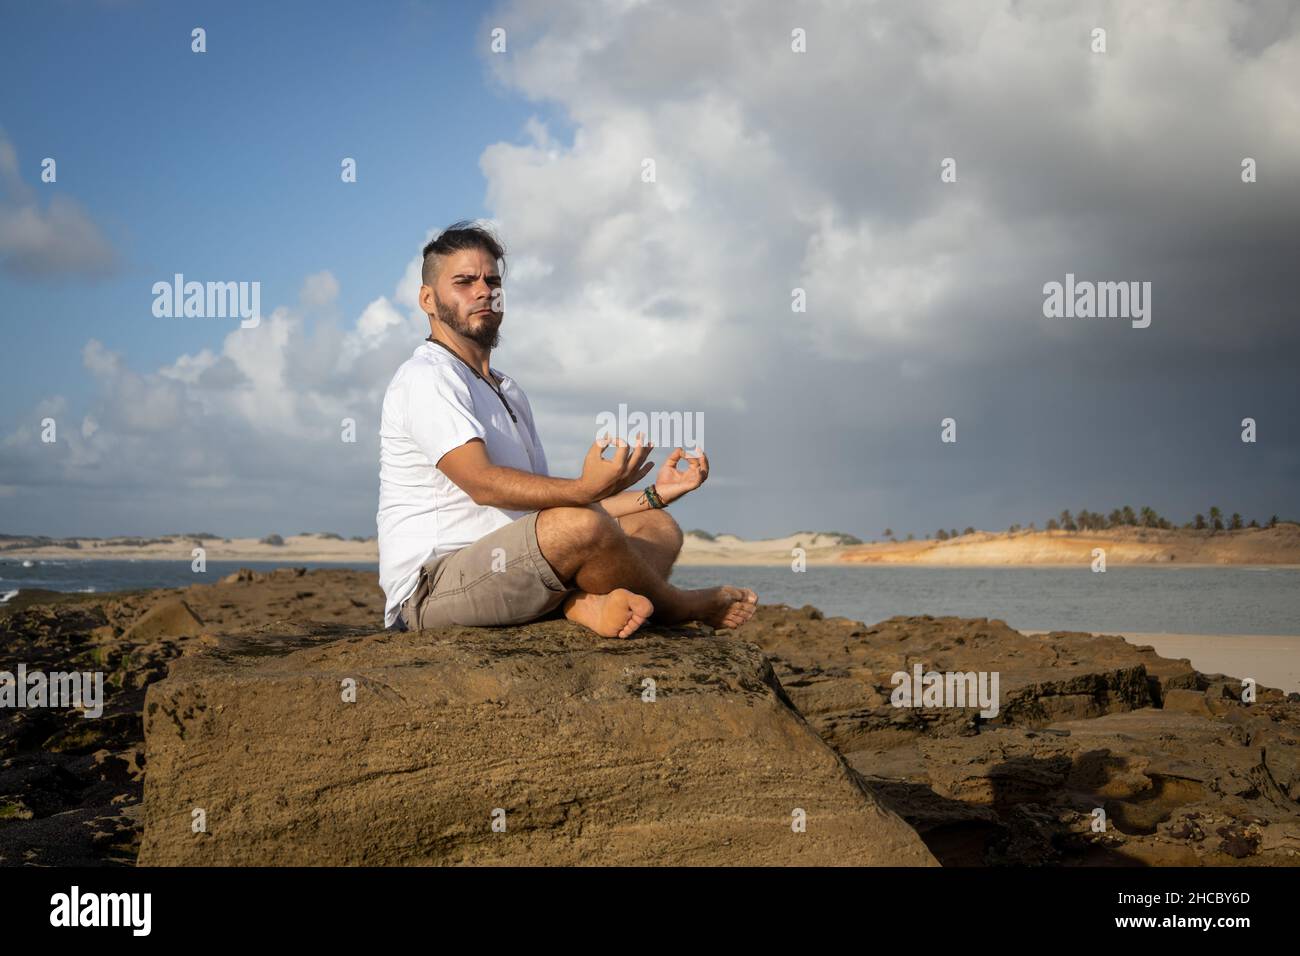 White man between 25 and 30 years old at the edge of the sea doing yoga. Meditation in nature. Stock Photo